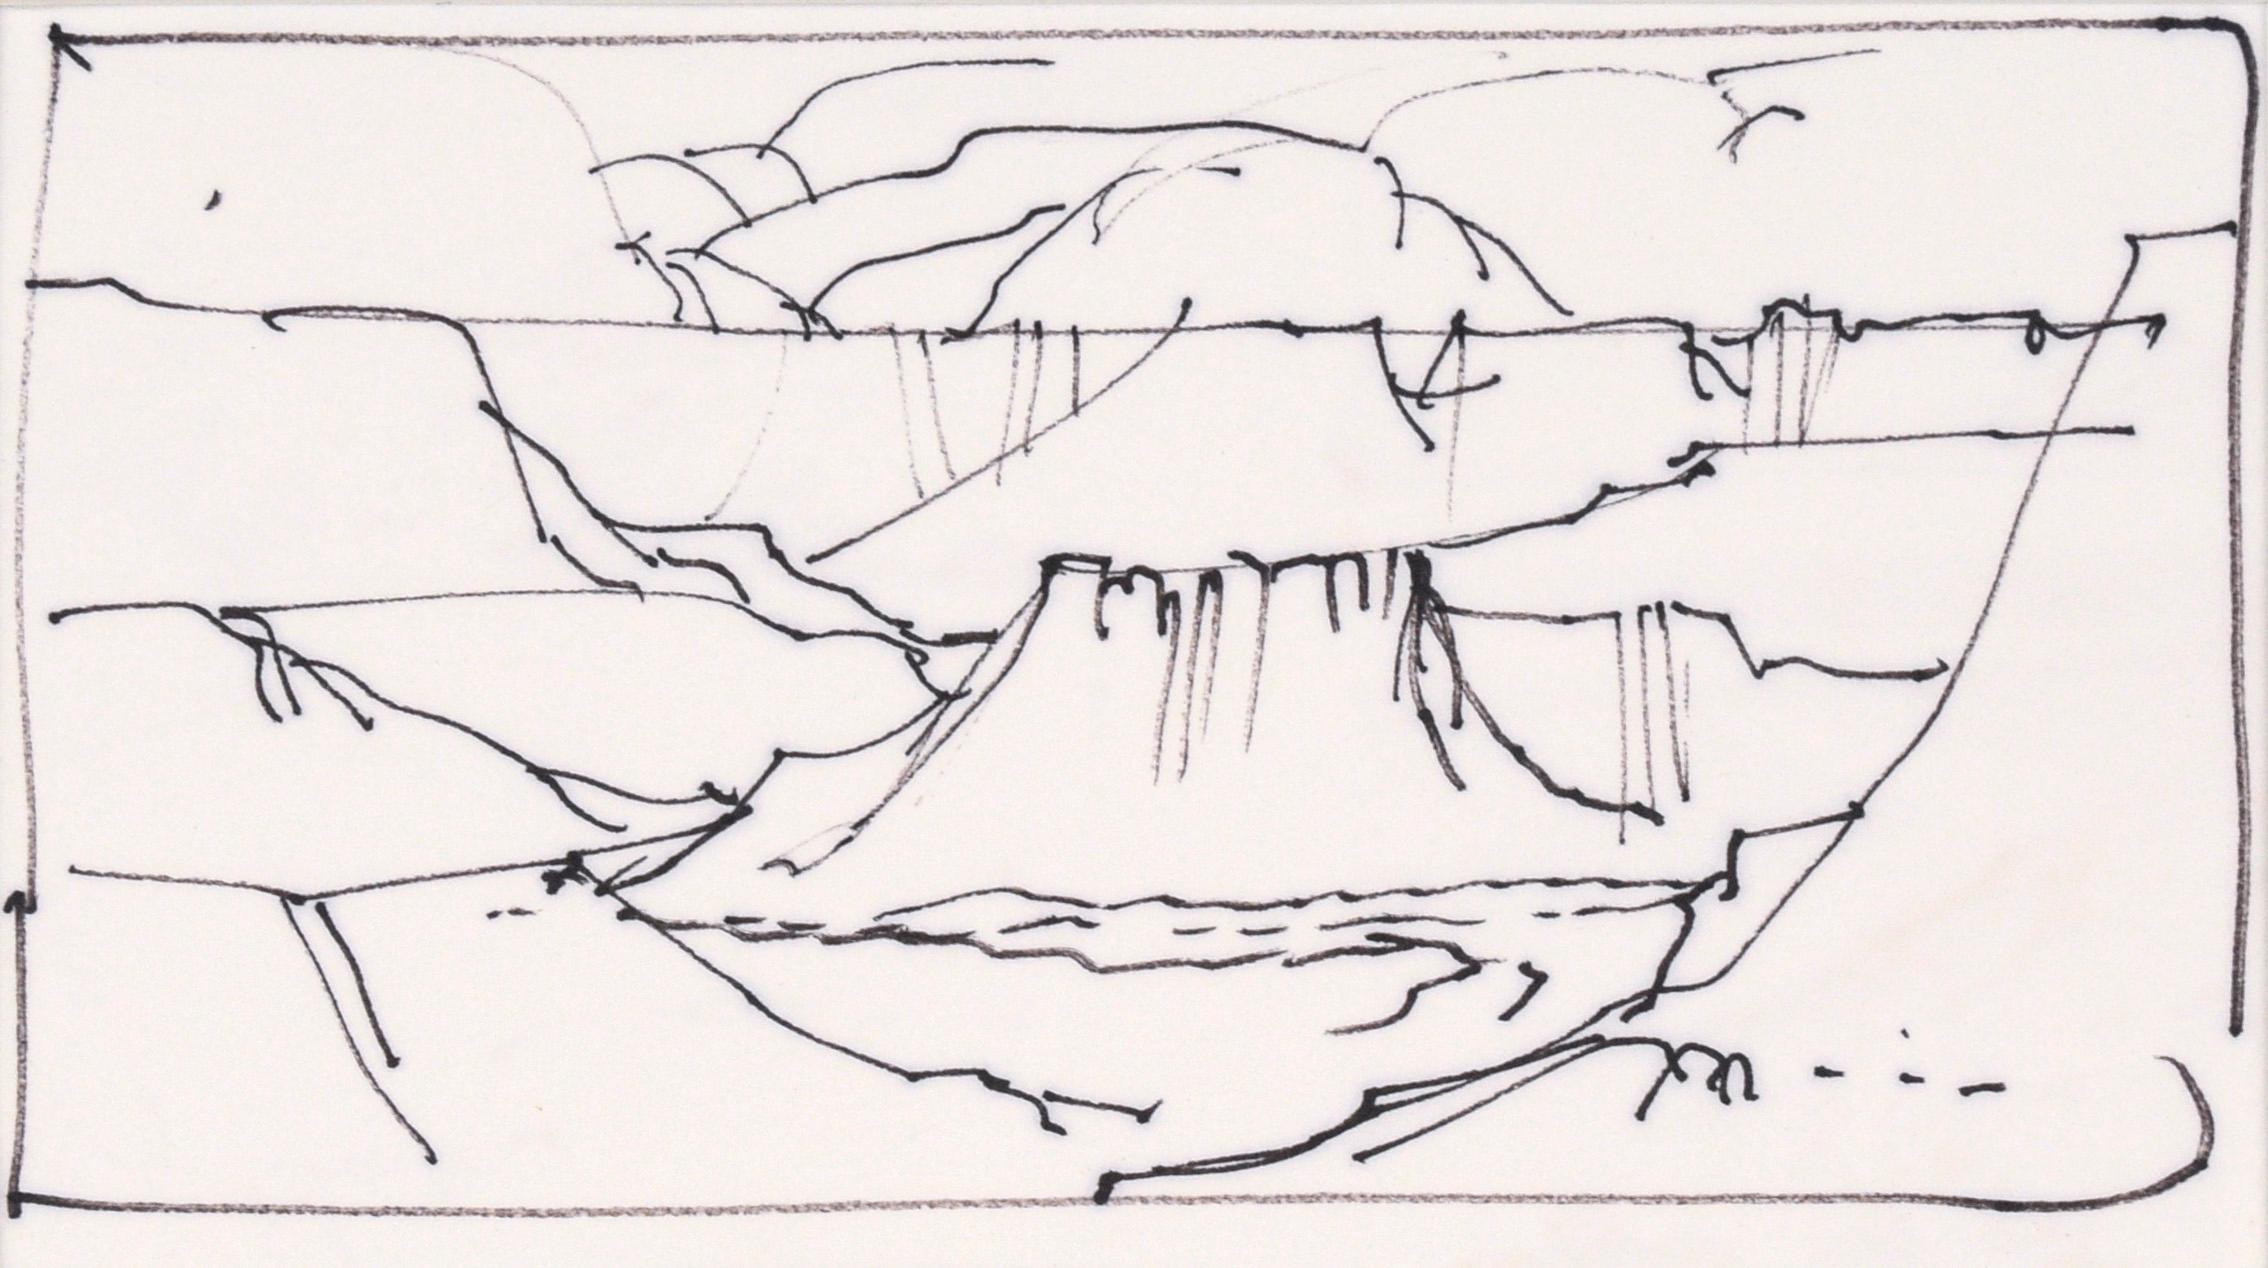 Grand Canyon Plateau - Line Drawing Landscape in Ink on Paper - Art by Laurence Sisson